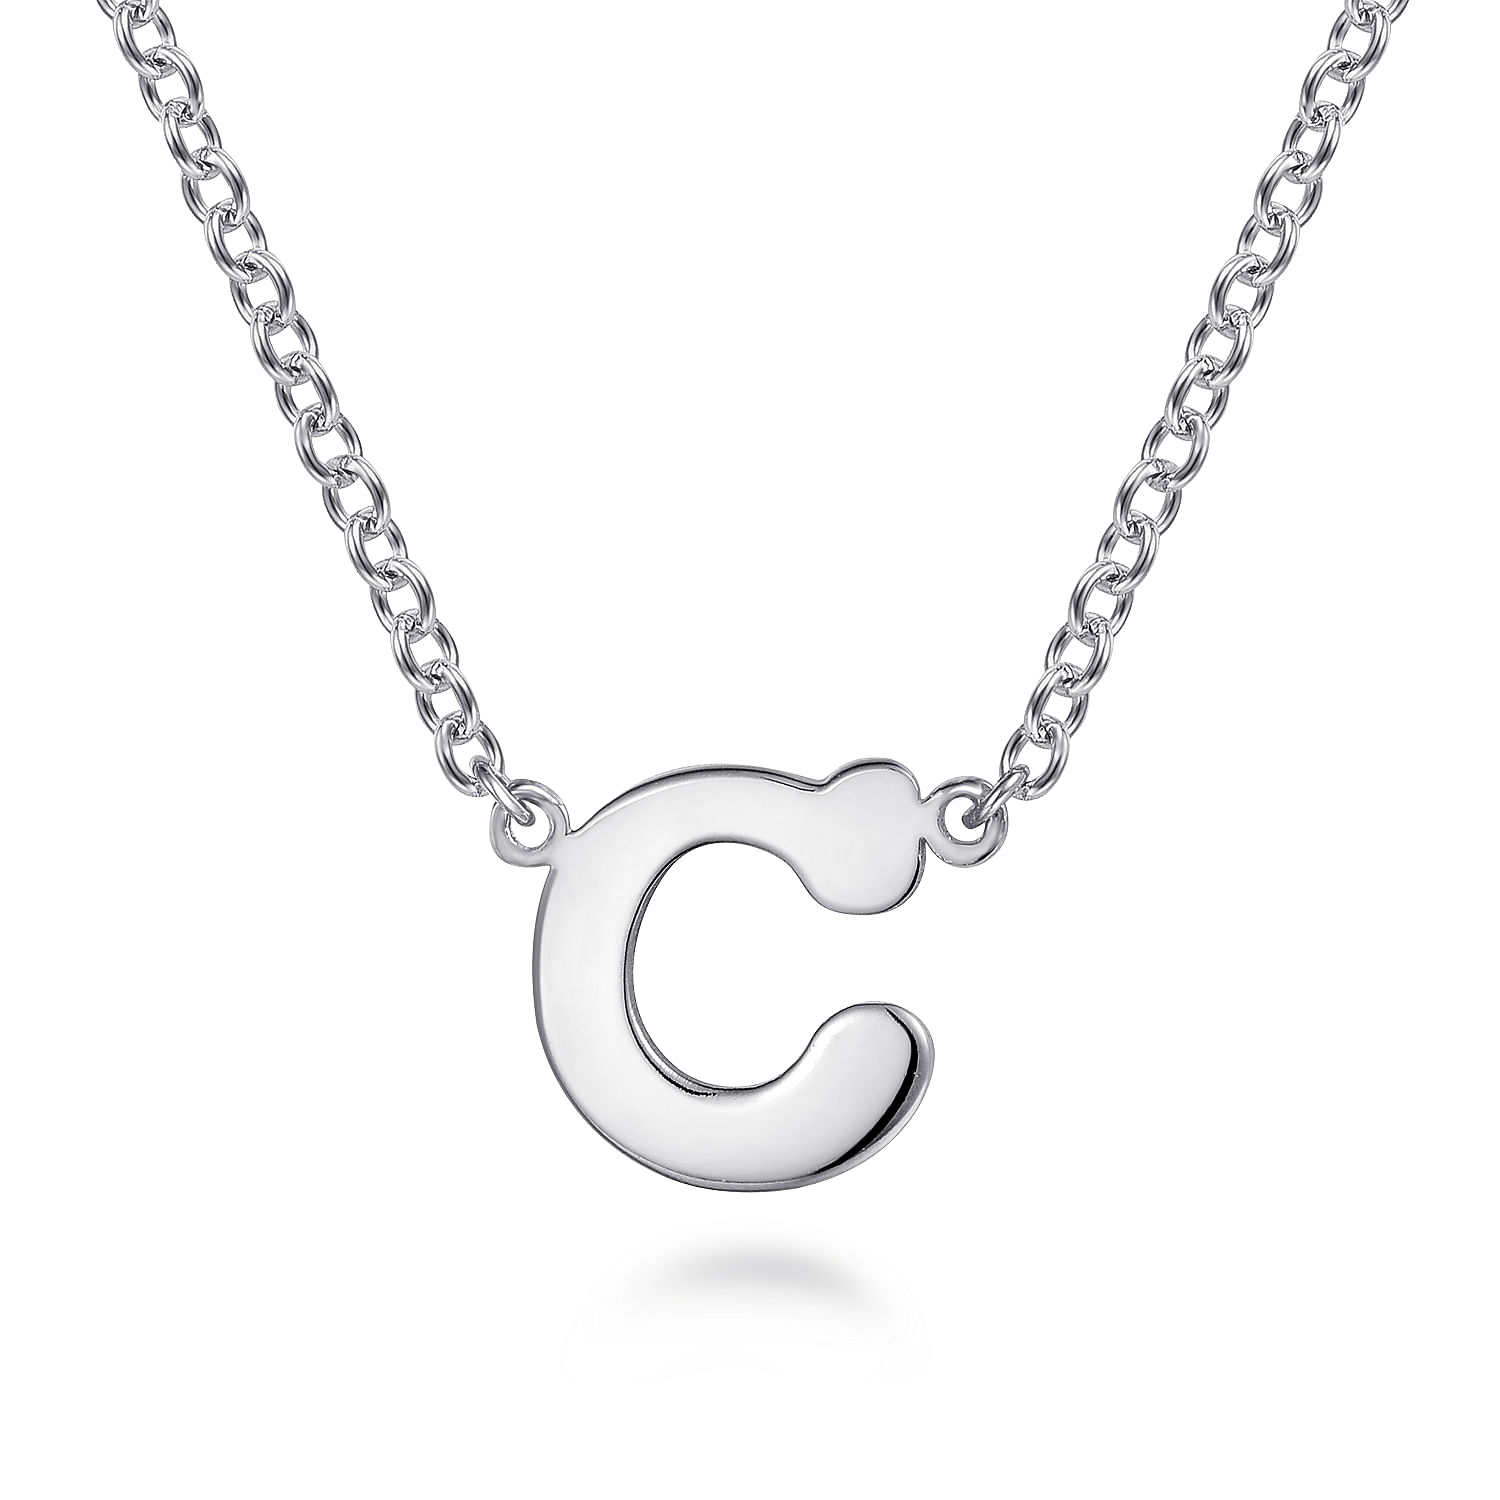 14K White Gold C Initial Necklace